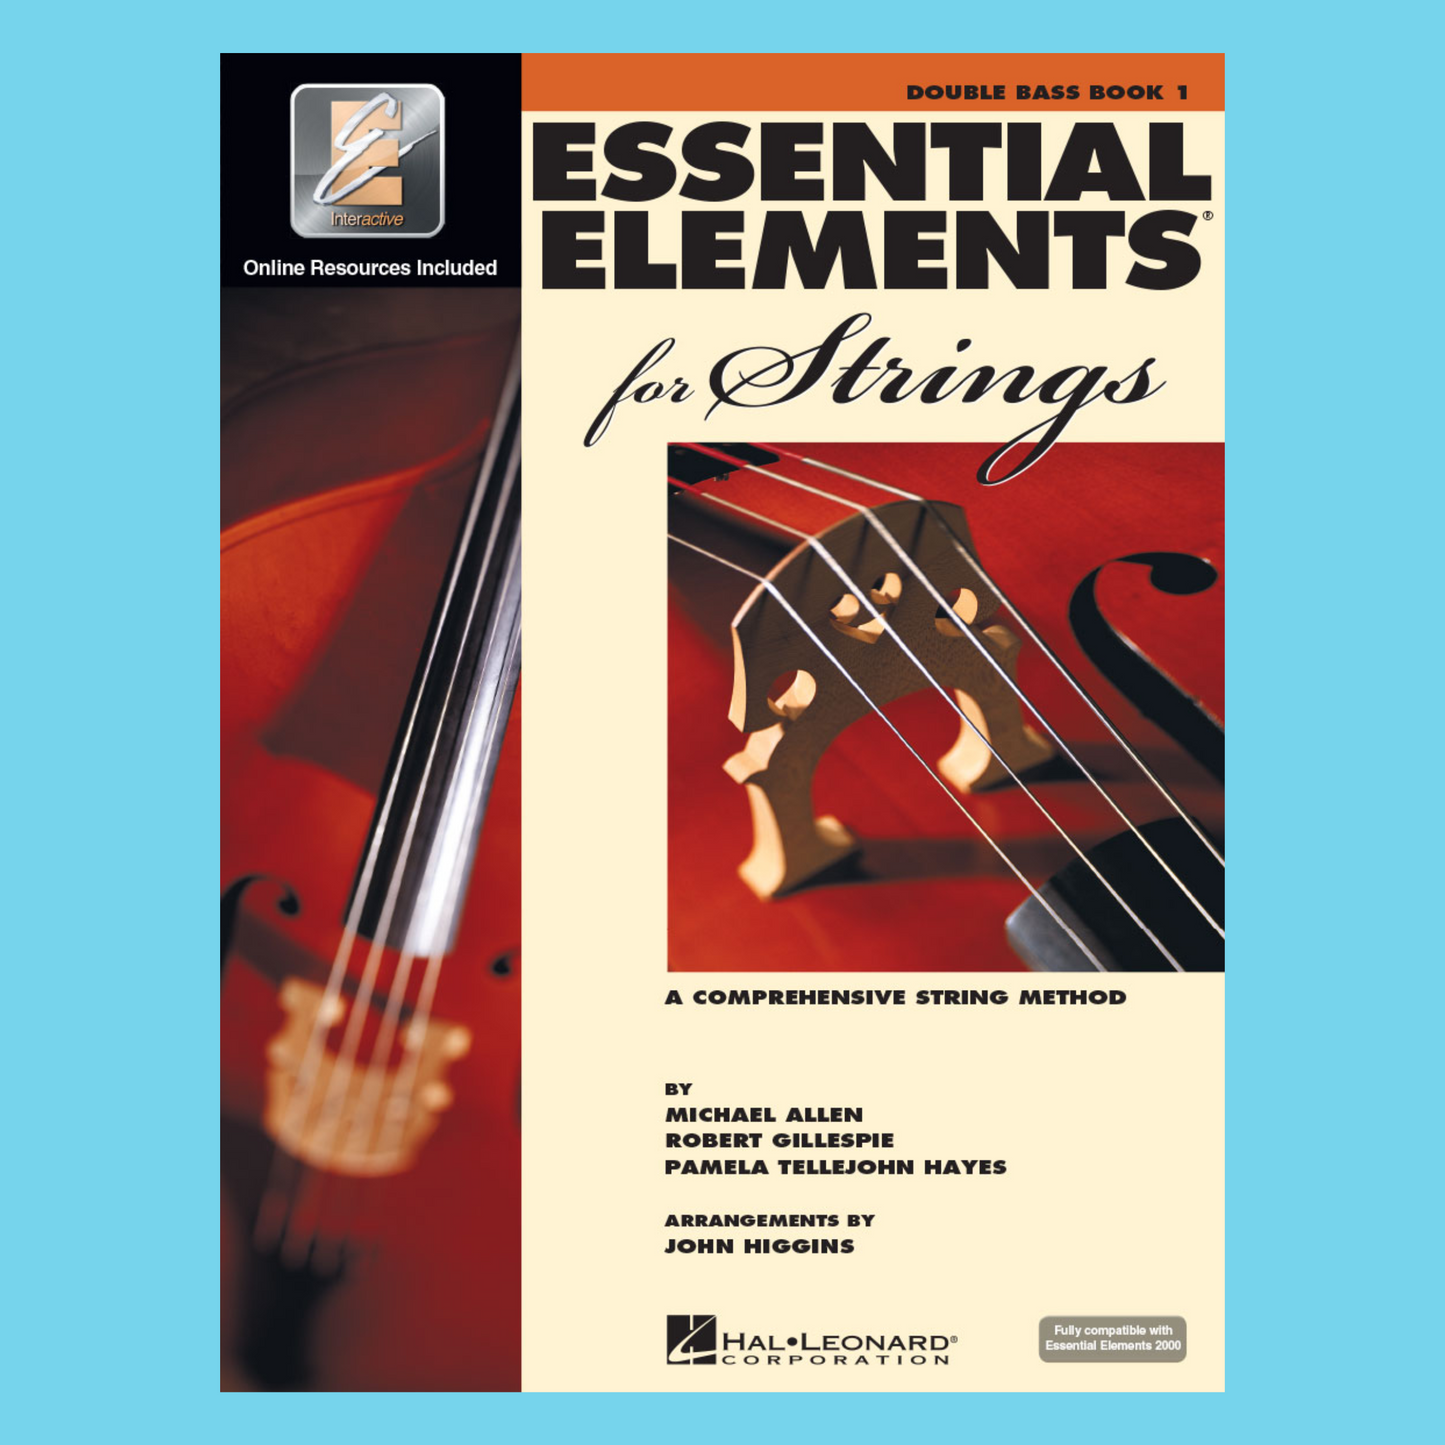 Essential Elements For Strings - Book 1 Double Bass (EEi Media)